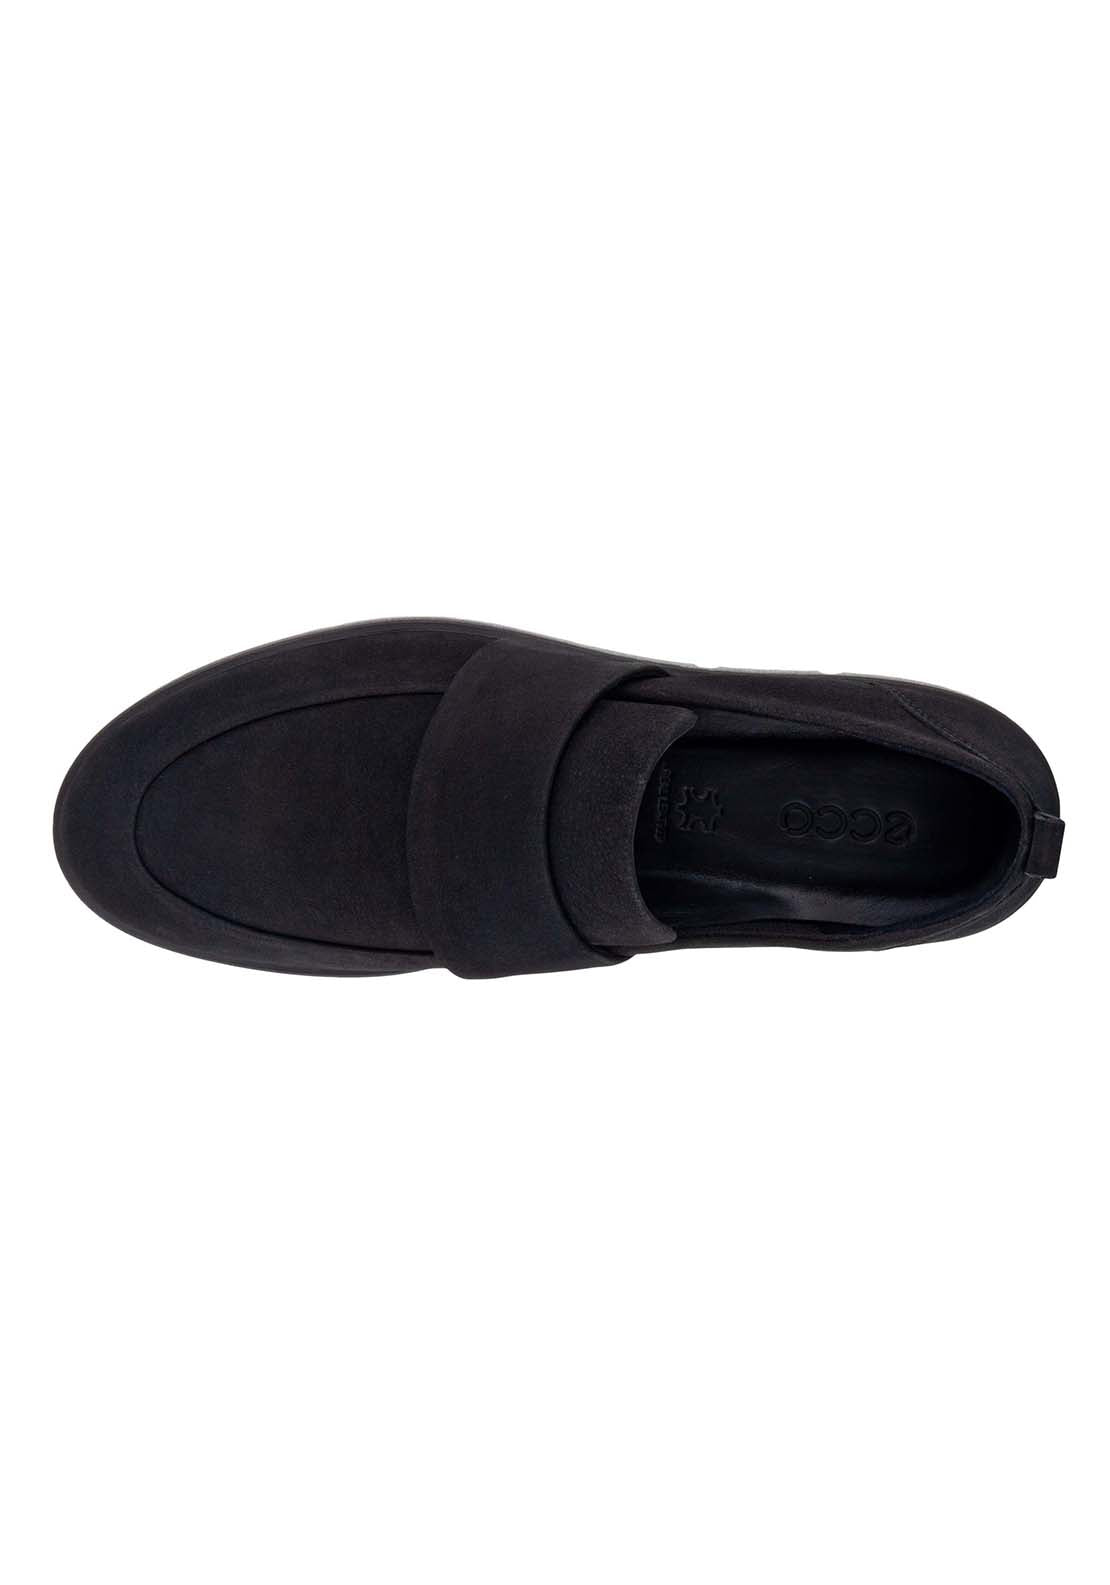 Ecco Bella Casual Slip on Shoe 3 Shaws Department Stores